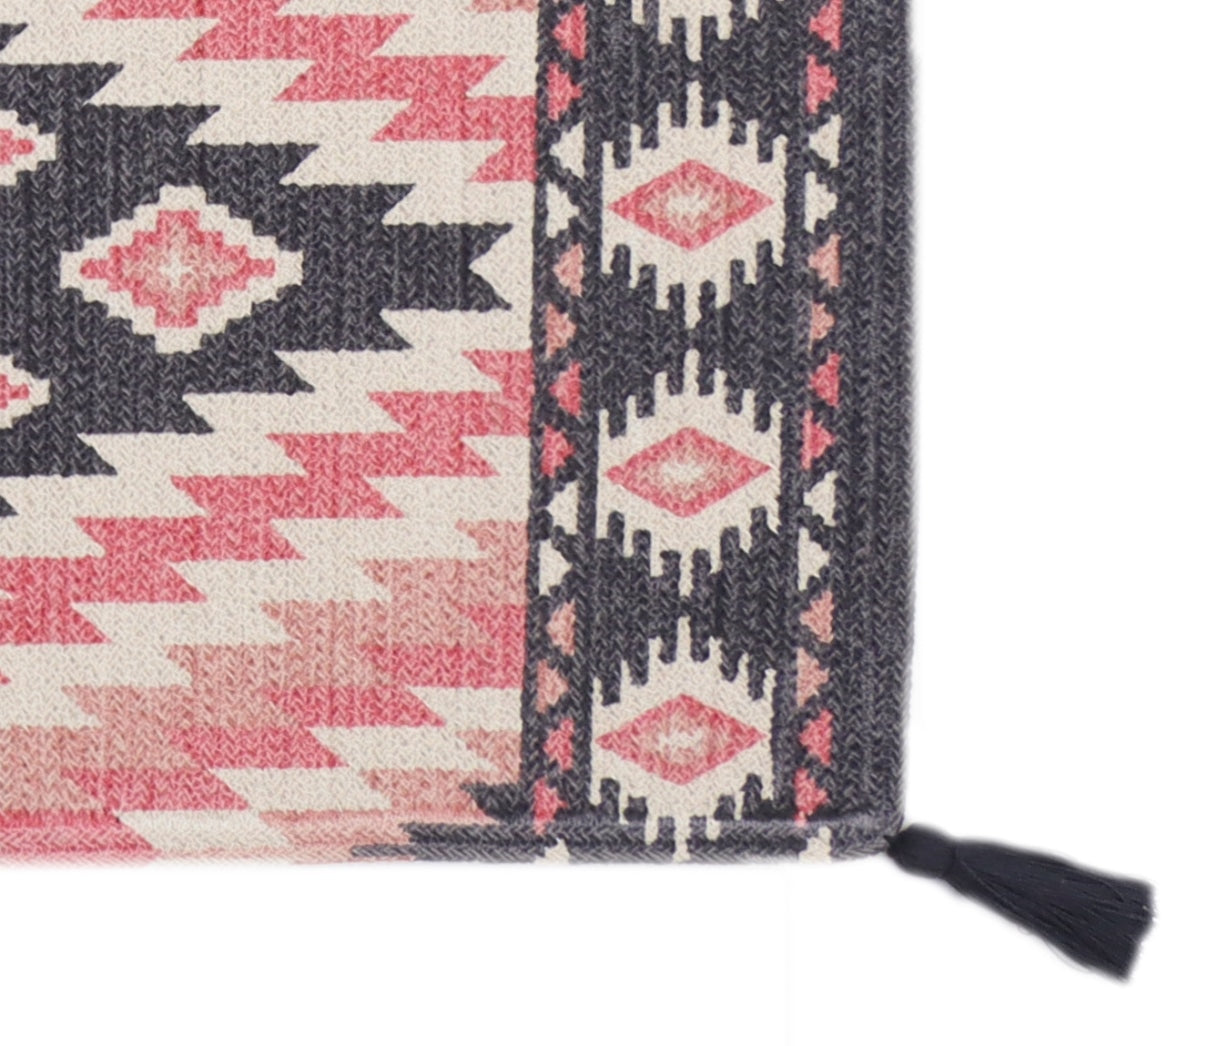 Multicolor Cotton Braided Screen Printed Dhurrie with Tassels - 2.5'x5'